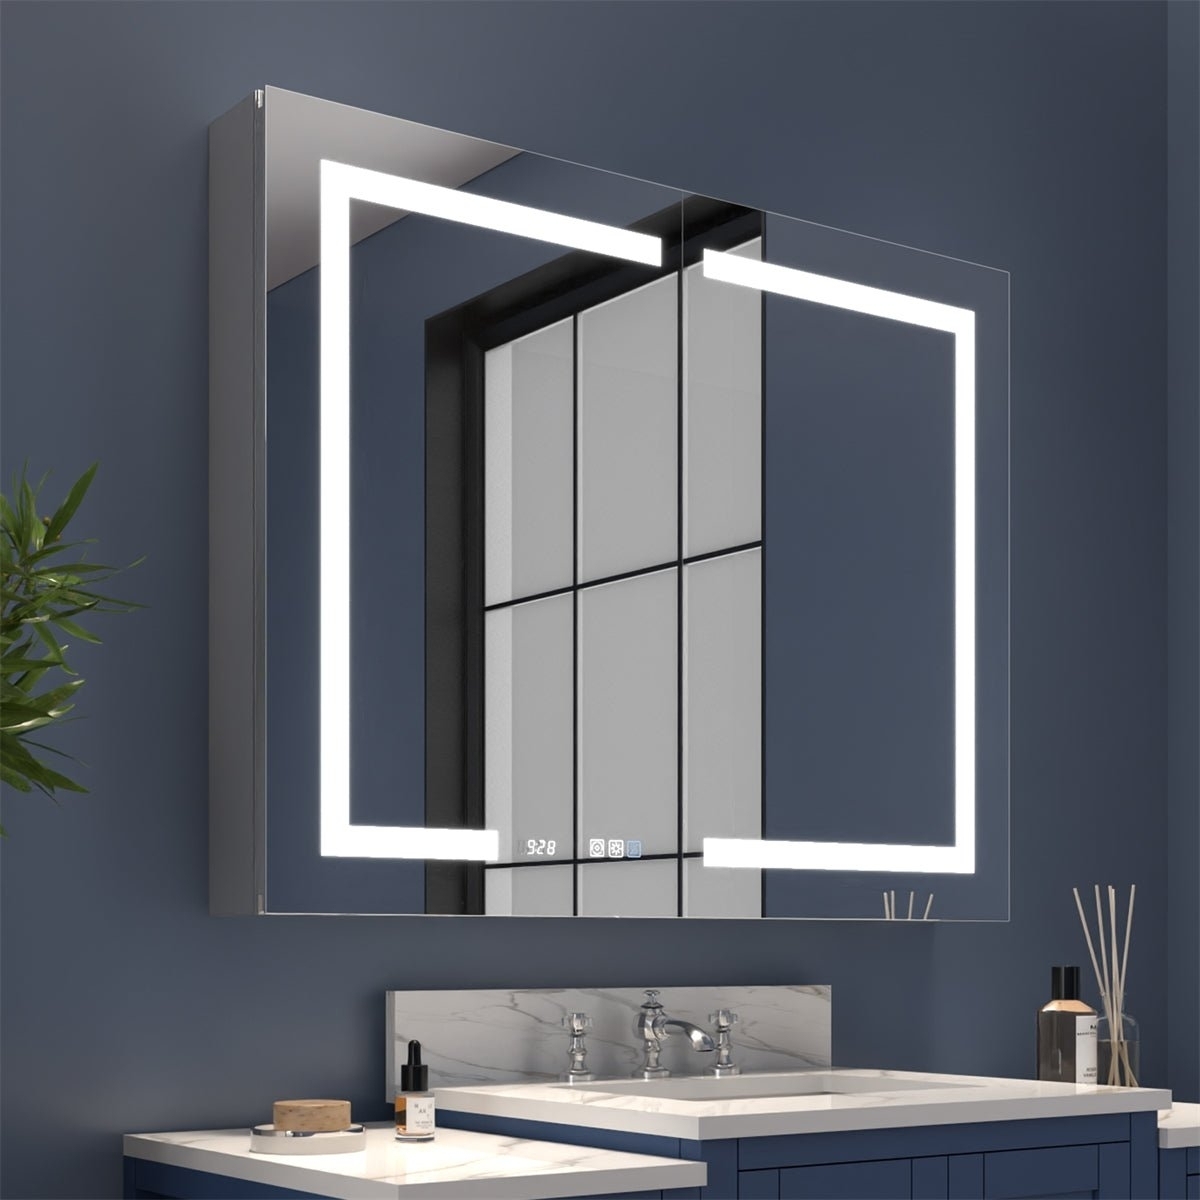 Boost-M2 40 W X 32 H Bathroom Light Medicine Cabinets With Vanity Mirror Recessed Or Surface